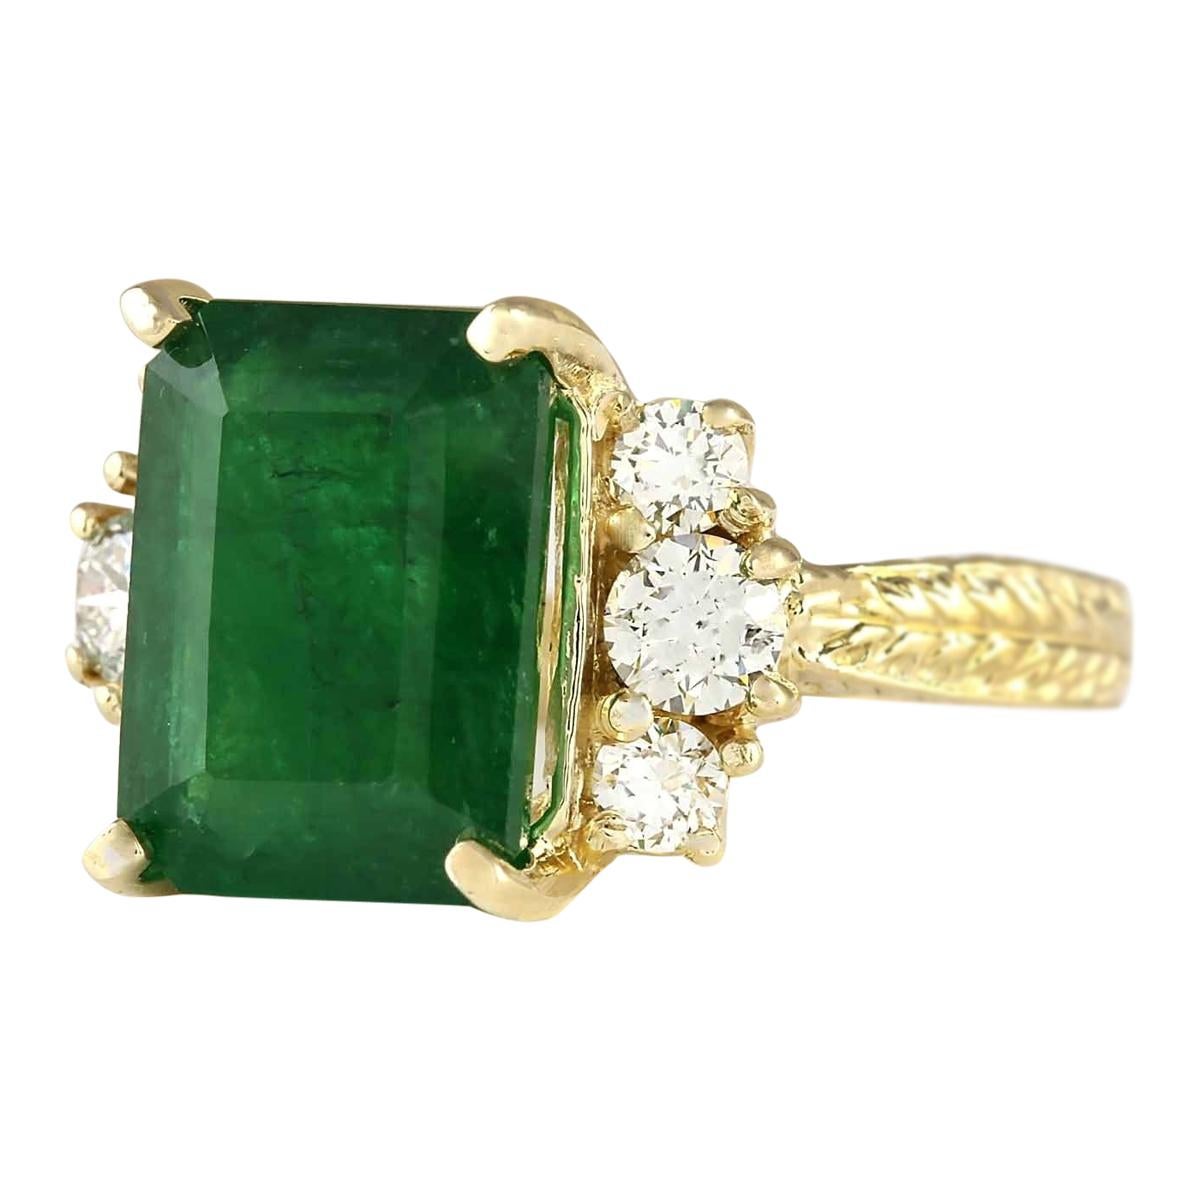 6.38 Carat Emerald 14 Karat Yellow Gold Diamond Ring
Stamped: 14K Yellow Gold
Total Ring Weight: 8.2 Grams
Emerald Weight is 5.78 Carat (Measures: 12.00x10.00 mm)
Diamond Weight is 0.60 Carat
Color: F-G, Clarity: VS2-SI1
Face Measures: 12.35x16.65